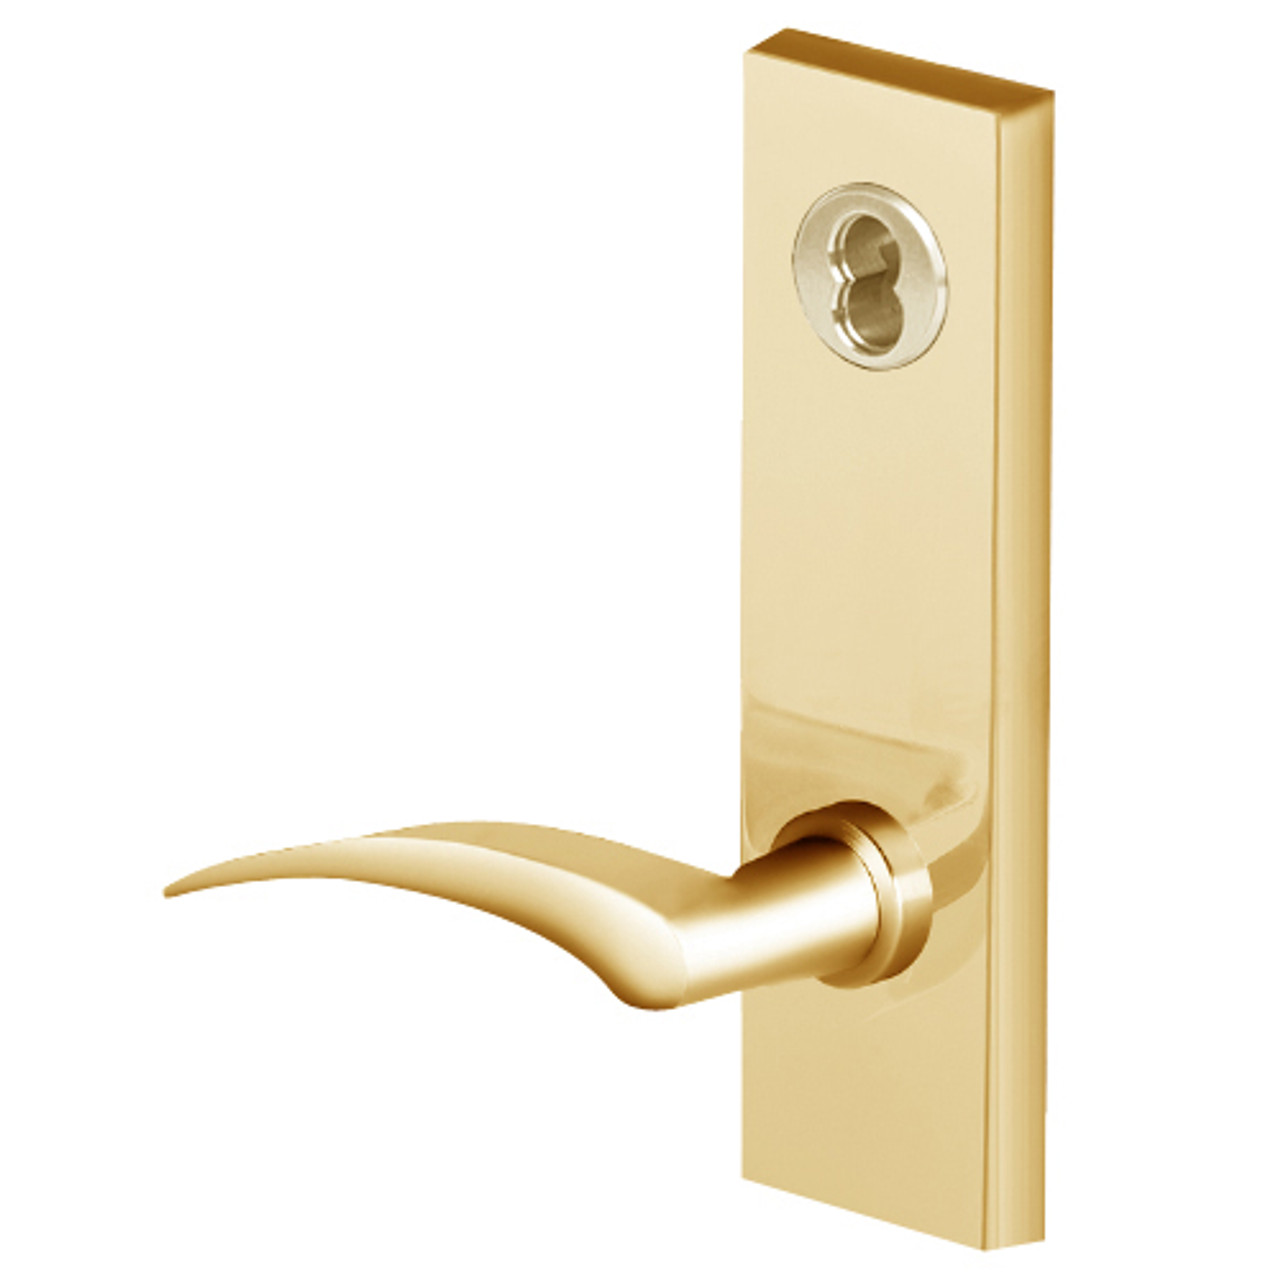 45H7H17LM605 Best 40H Series Hotel with Deadbolt Heavy Duty Mortise Lever Lock with Gull Wing LH in Bright Brass